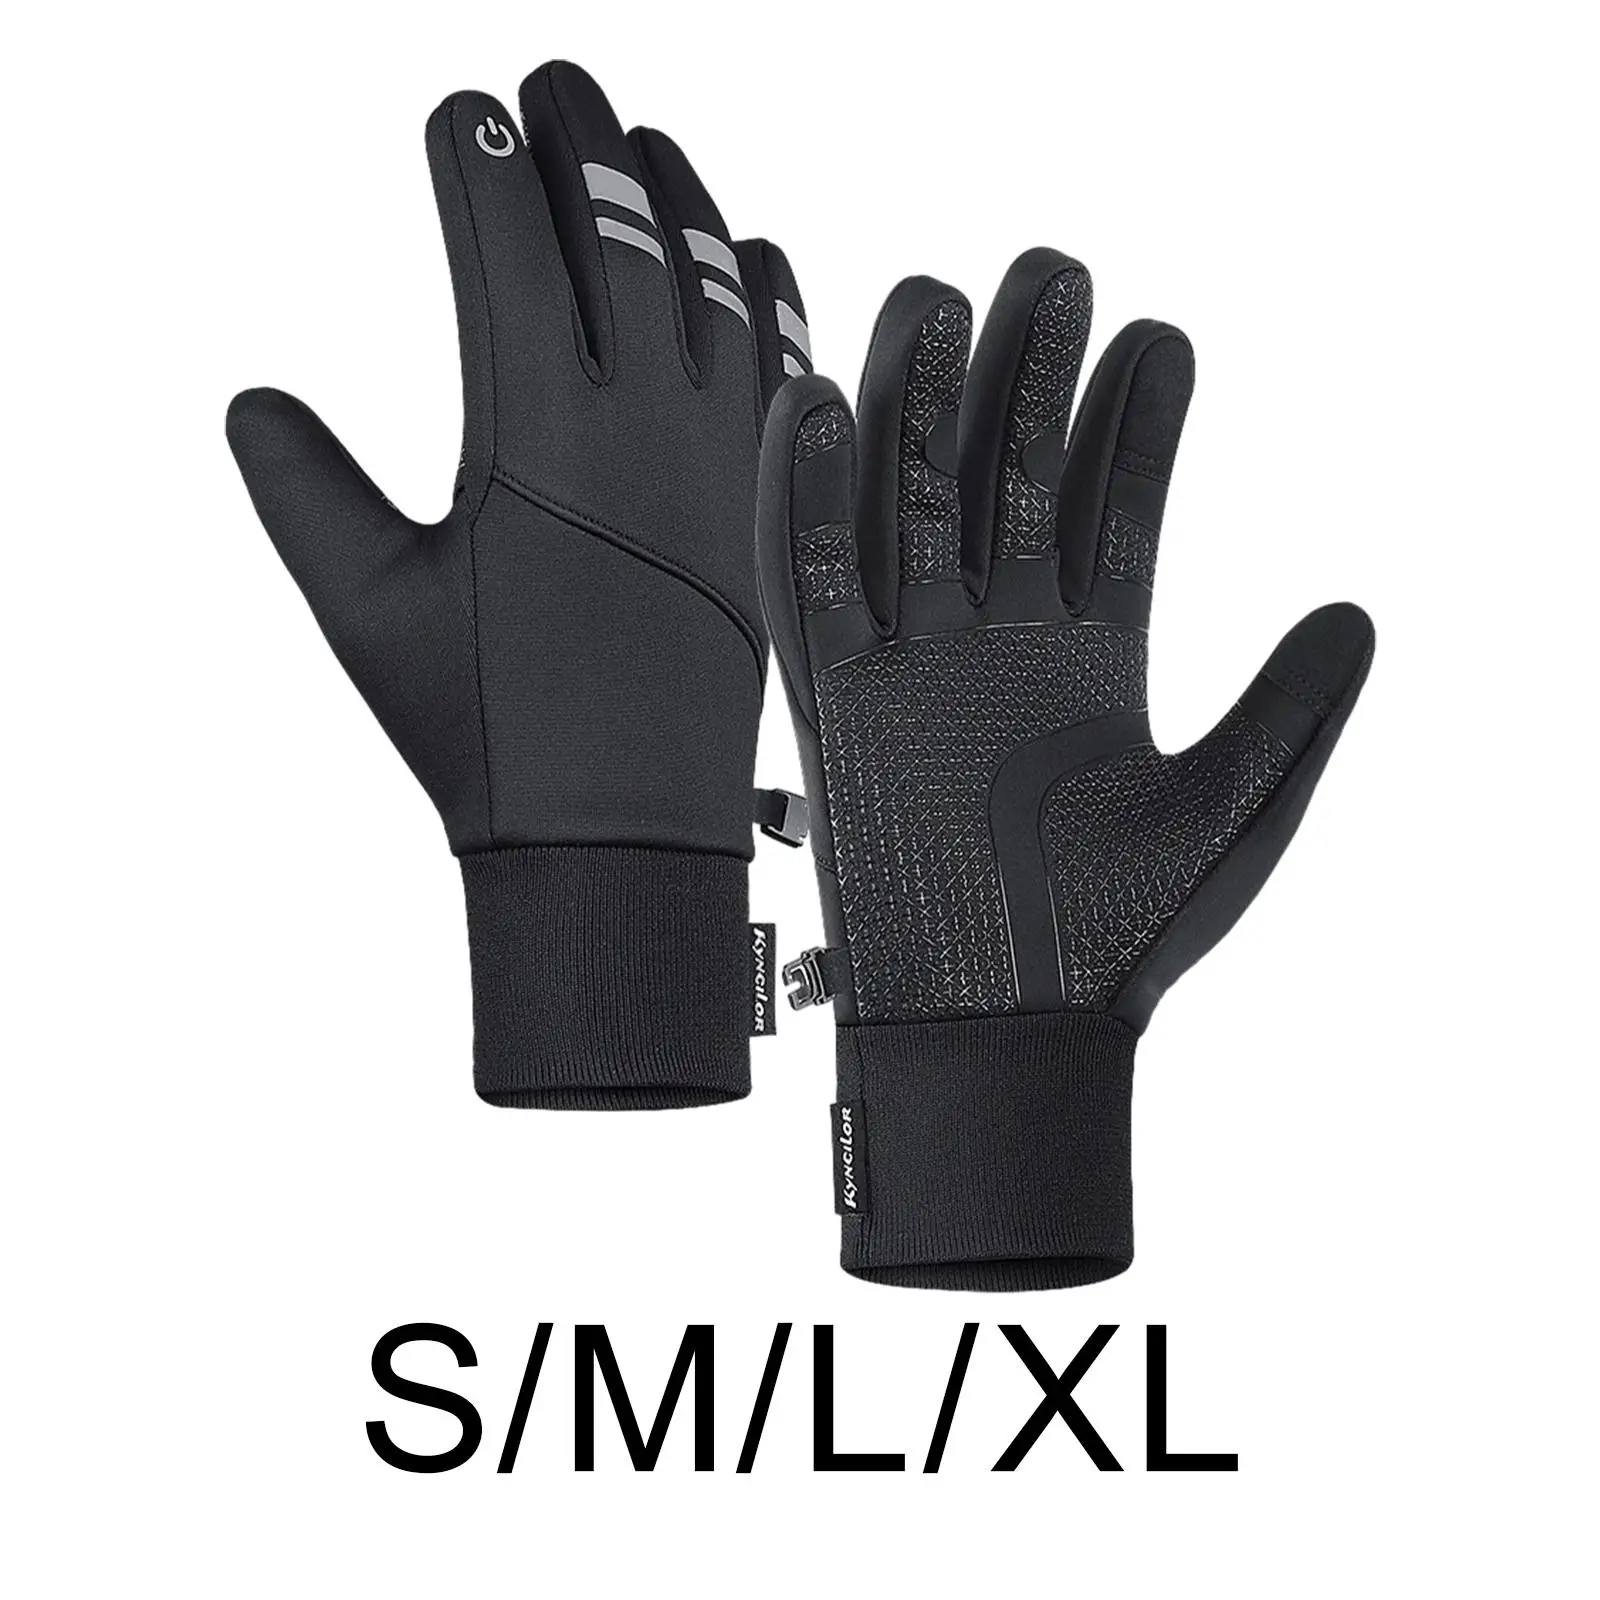 Cycling Gloves Winter Ski Gloves, Touch Screen Motorcycle Gloves, Waterproof Lightweight Warm Mittens for Skiing